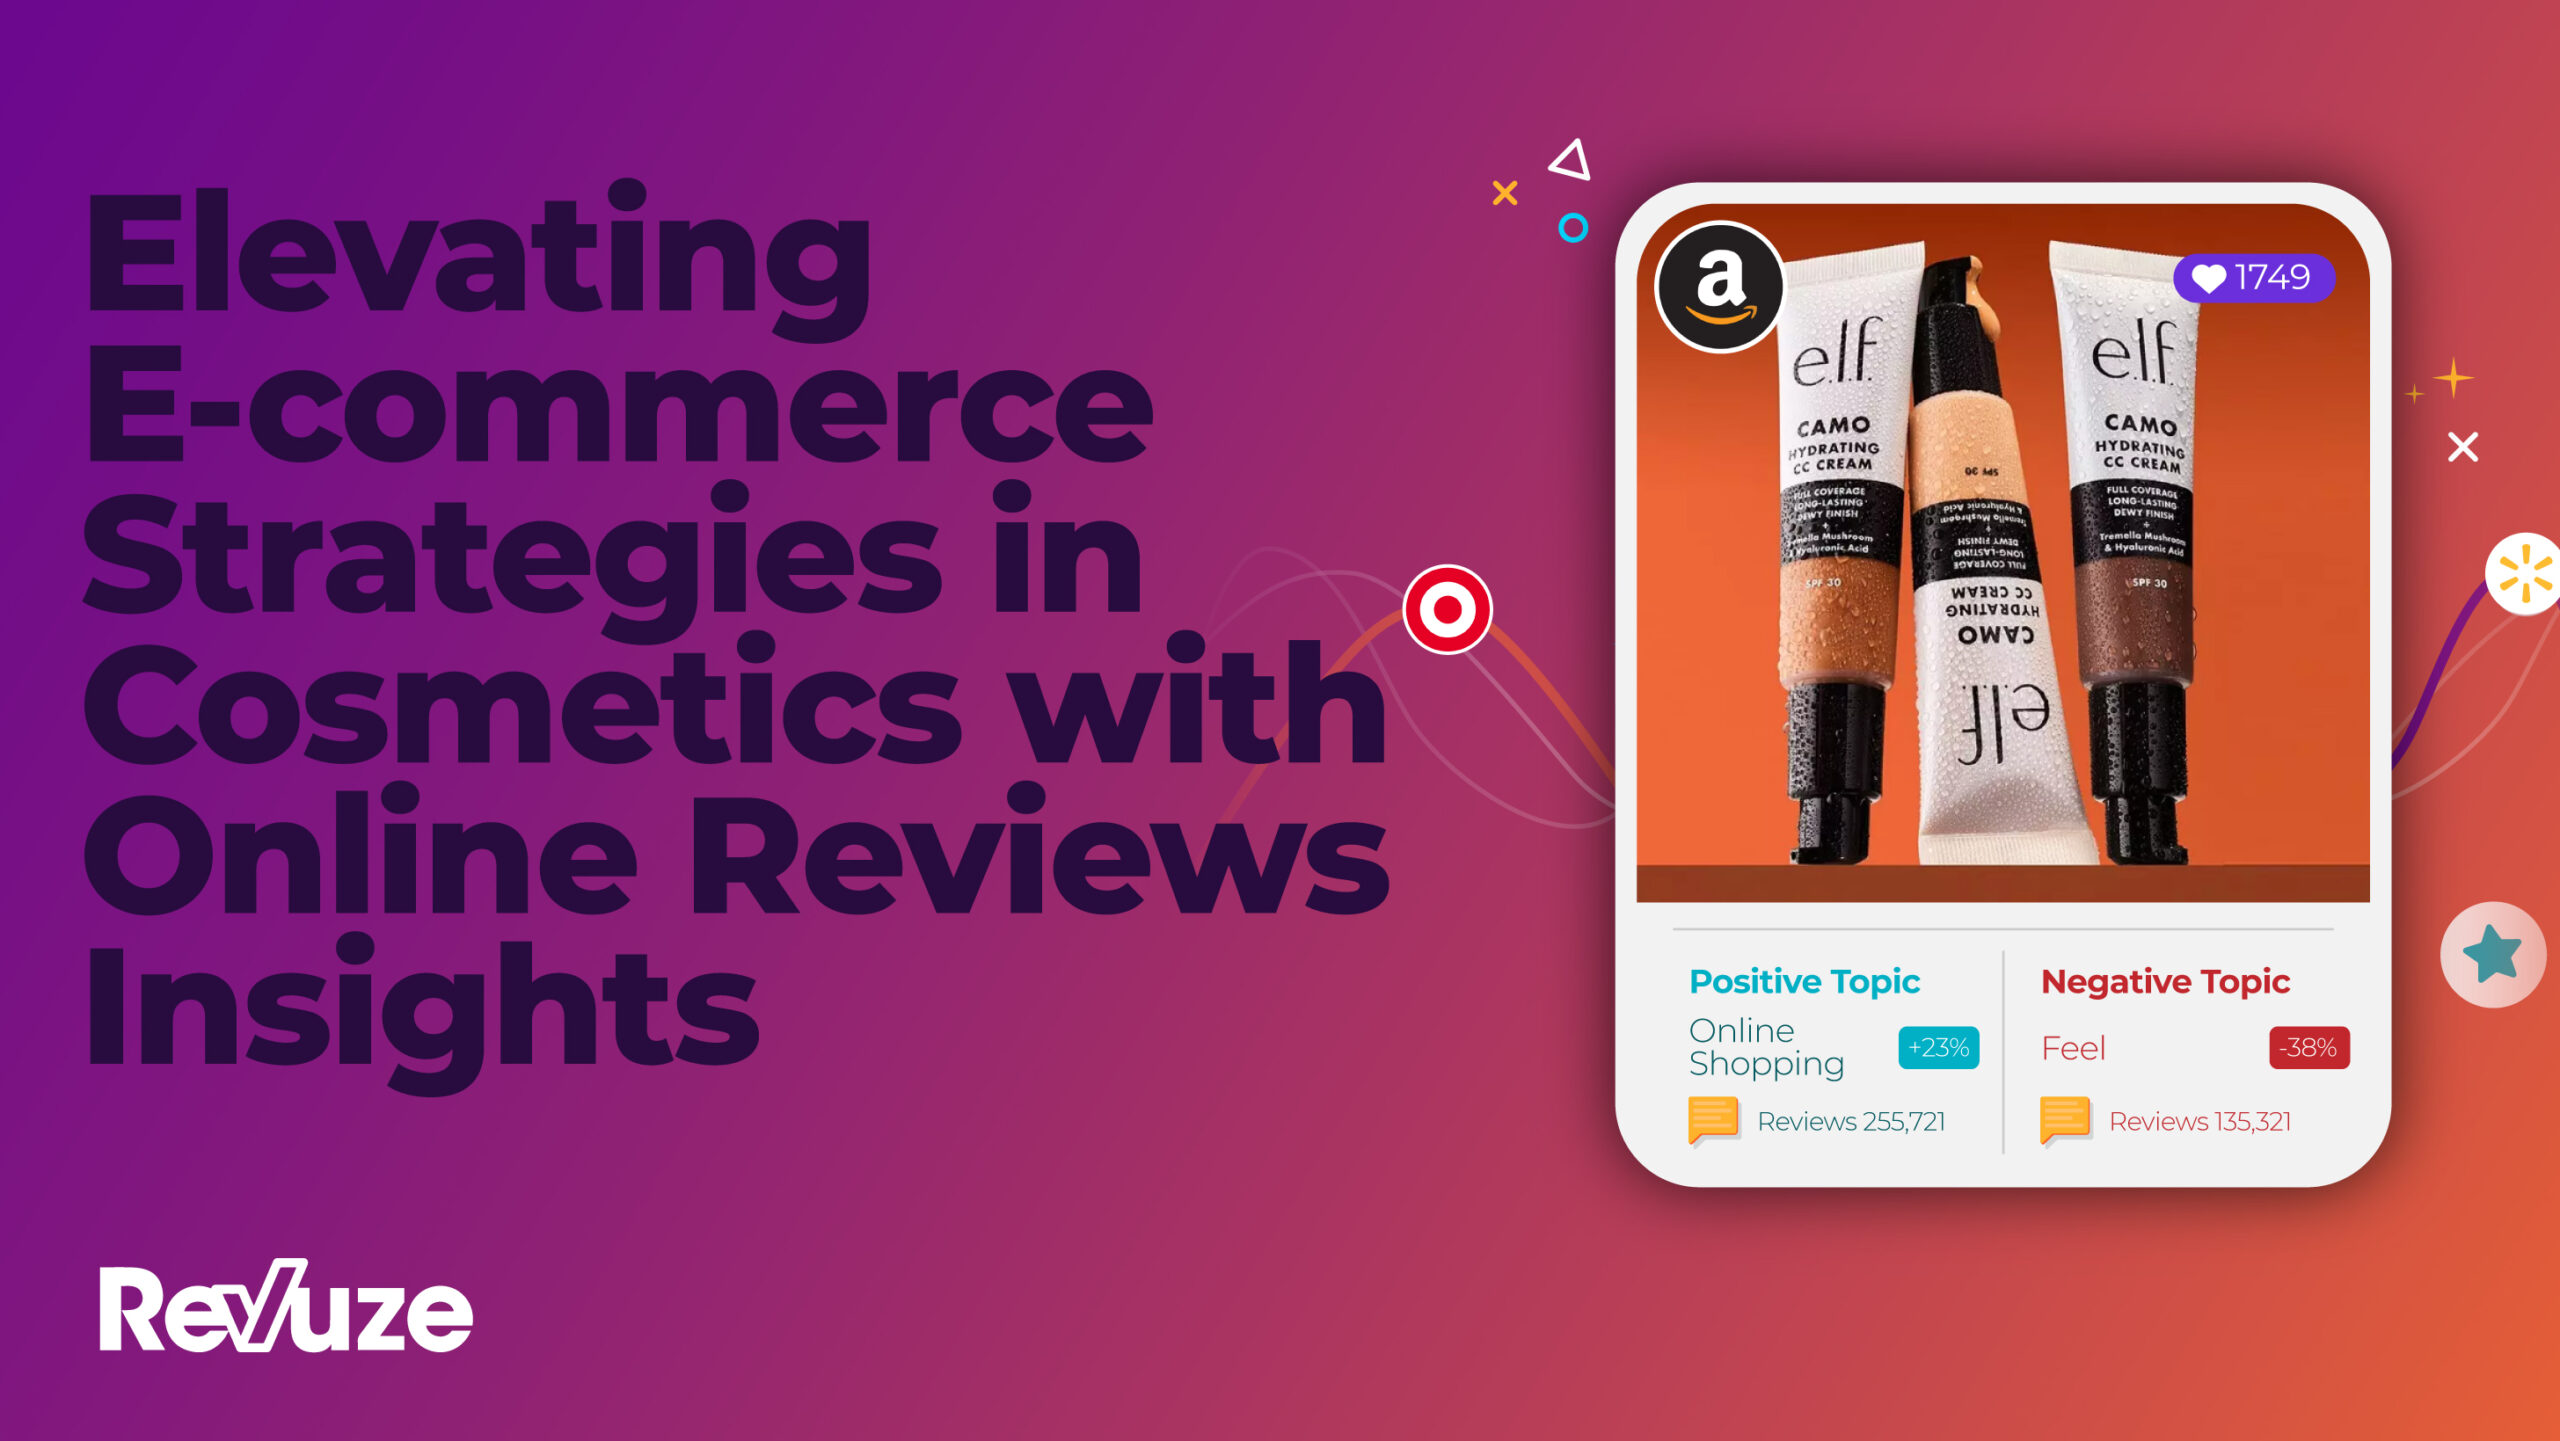 Elevating E-commerce Strategies in Cosmetics with Online Reviews Insights